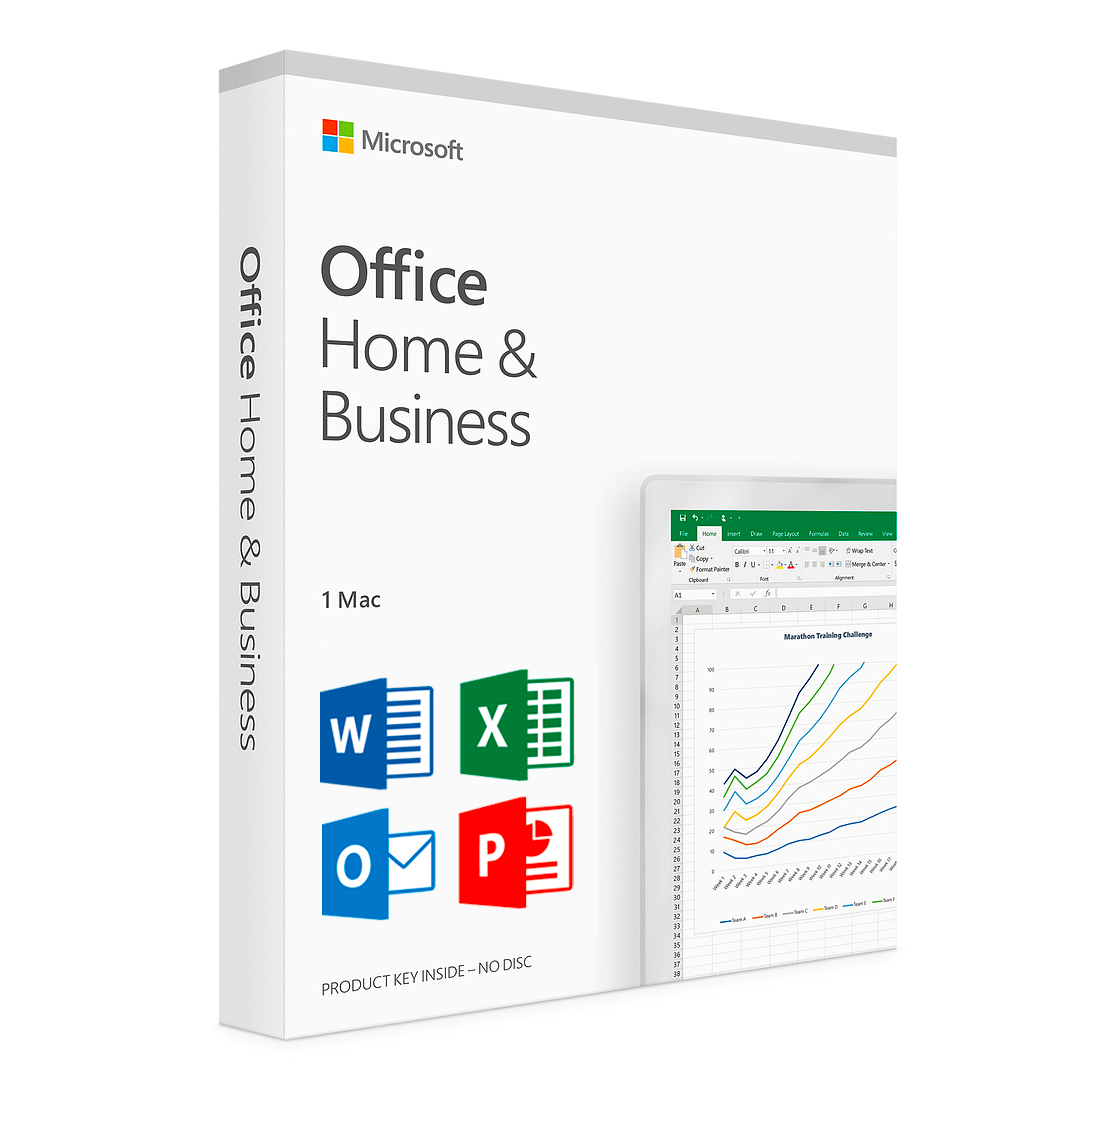 Microsoft Office 2019 Home and Business. Office 2021 Pro Plus. Microsoft Office 2019 Home and Business, Box. Office 2019 Home and Business Mac.